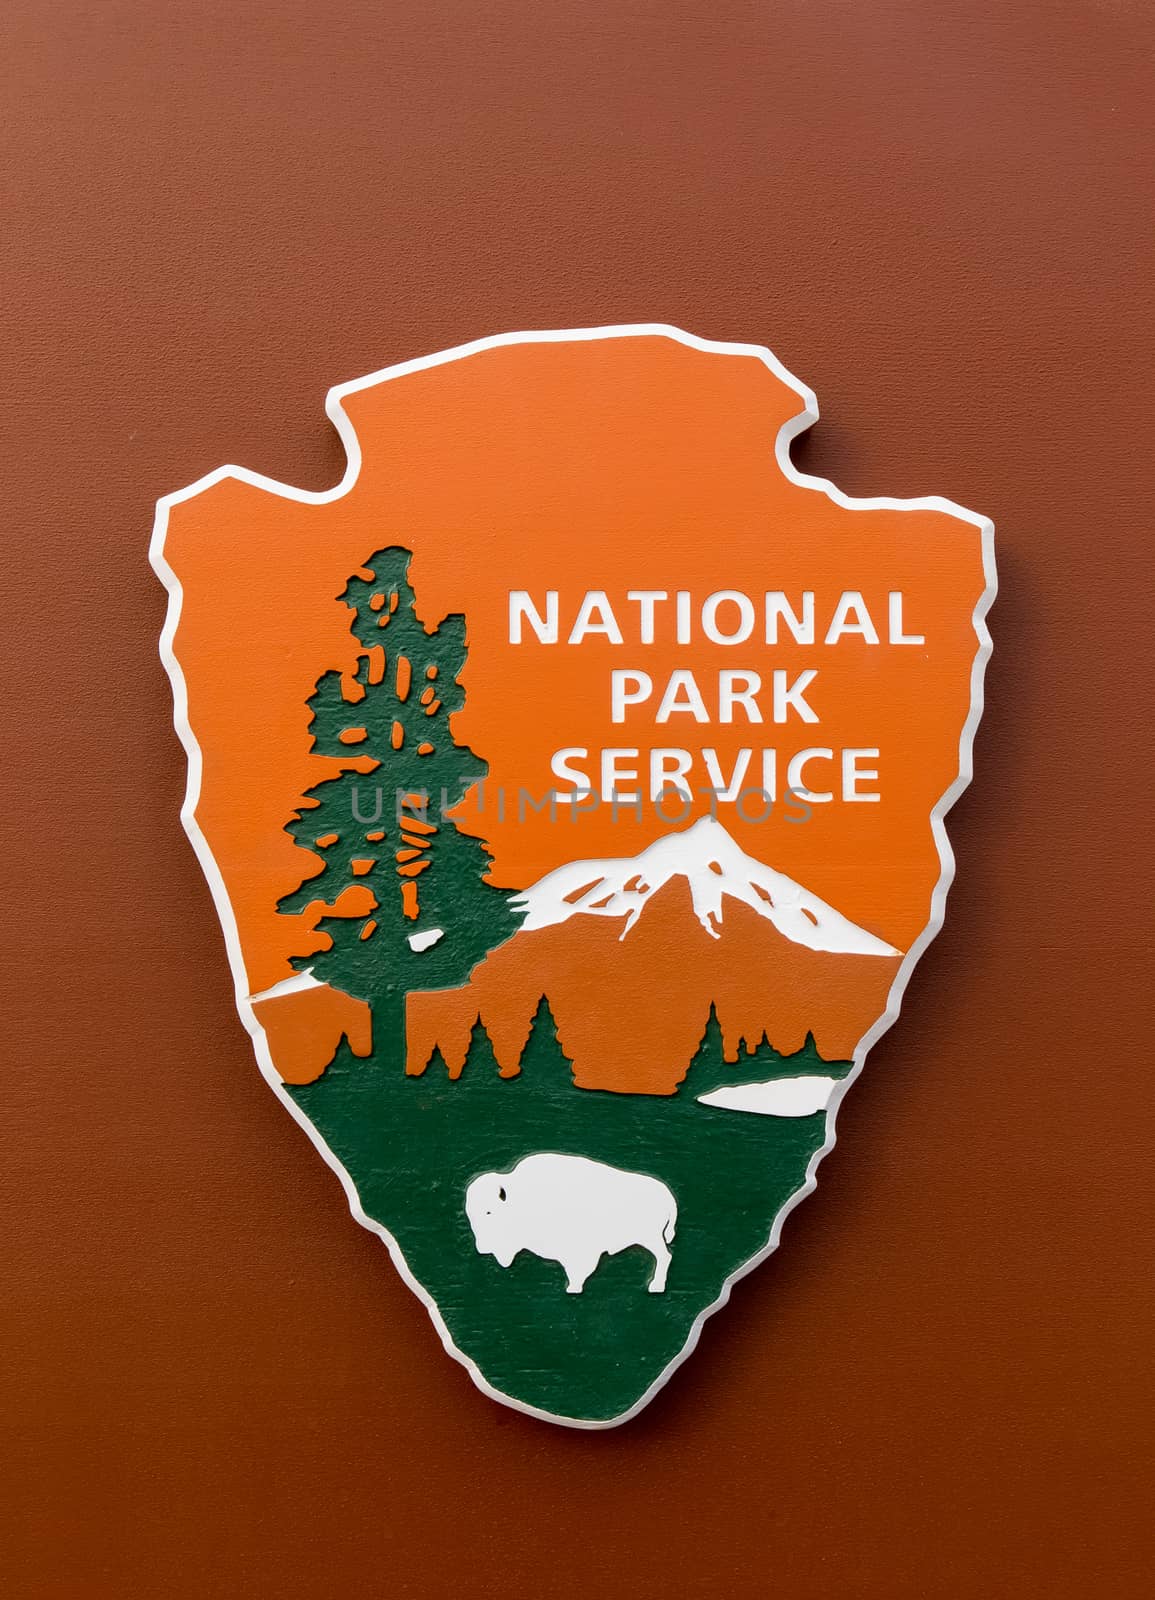 United States National Park Service Logo and Emblem by wolterk